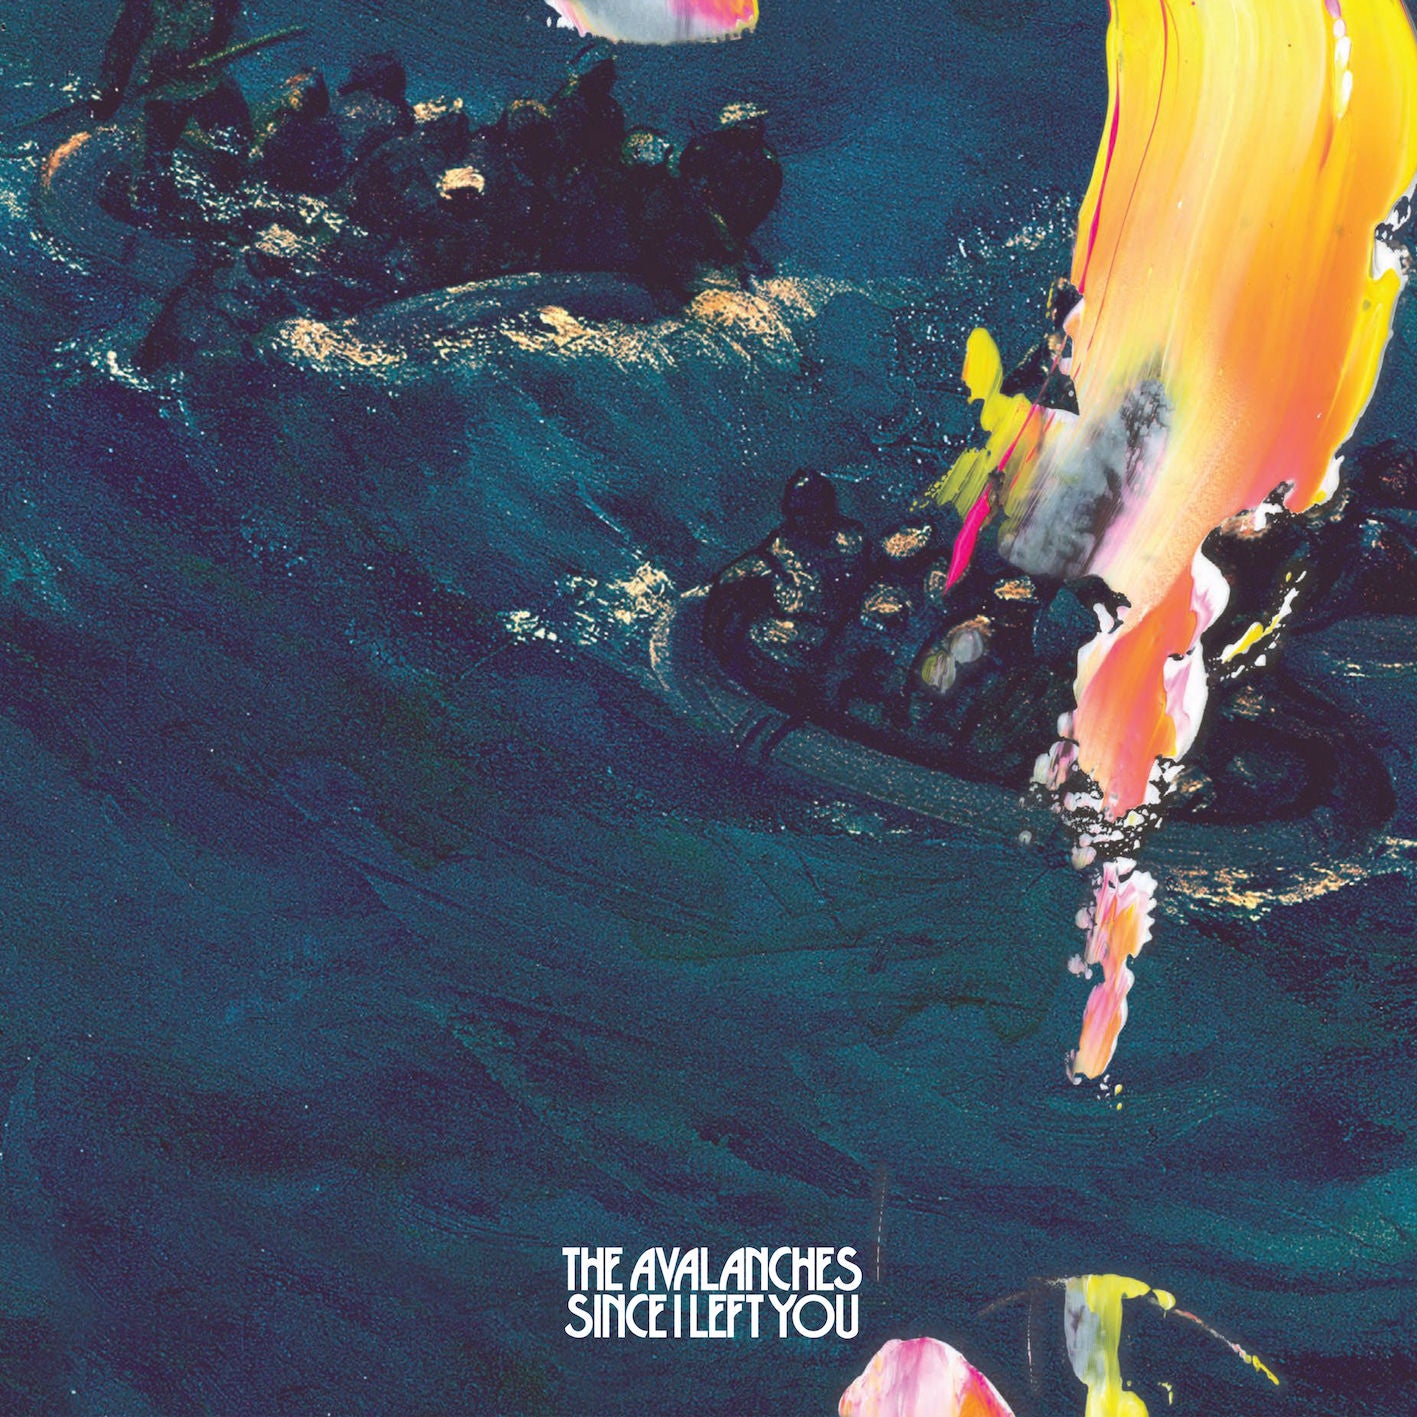 The Avalanches - Since I Left You (20th Anniversary): Deluxe Edition 2CD